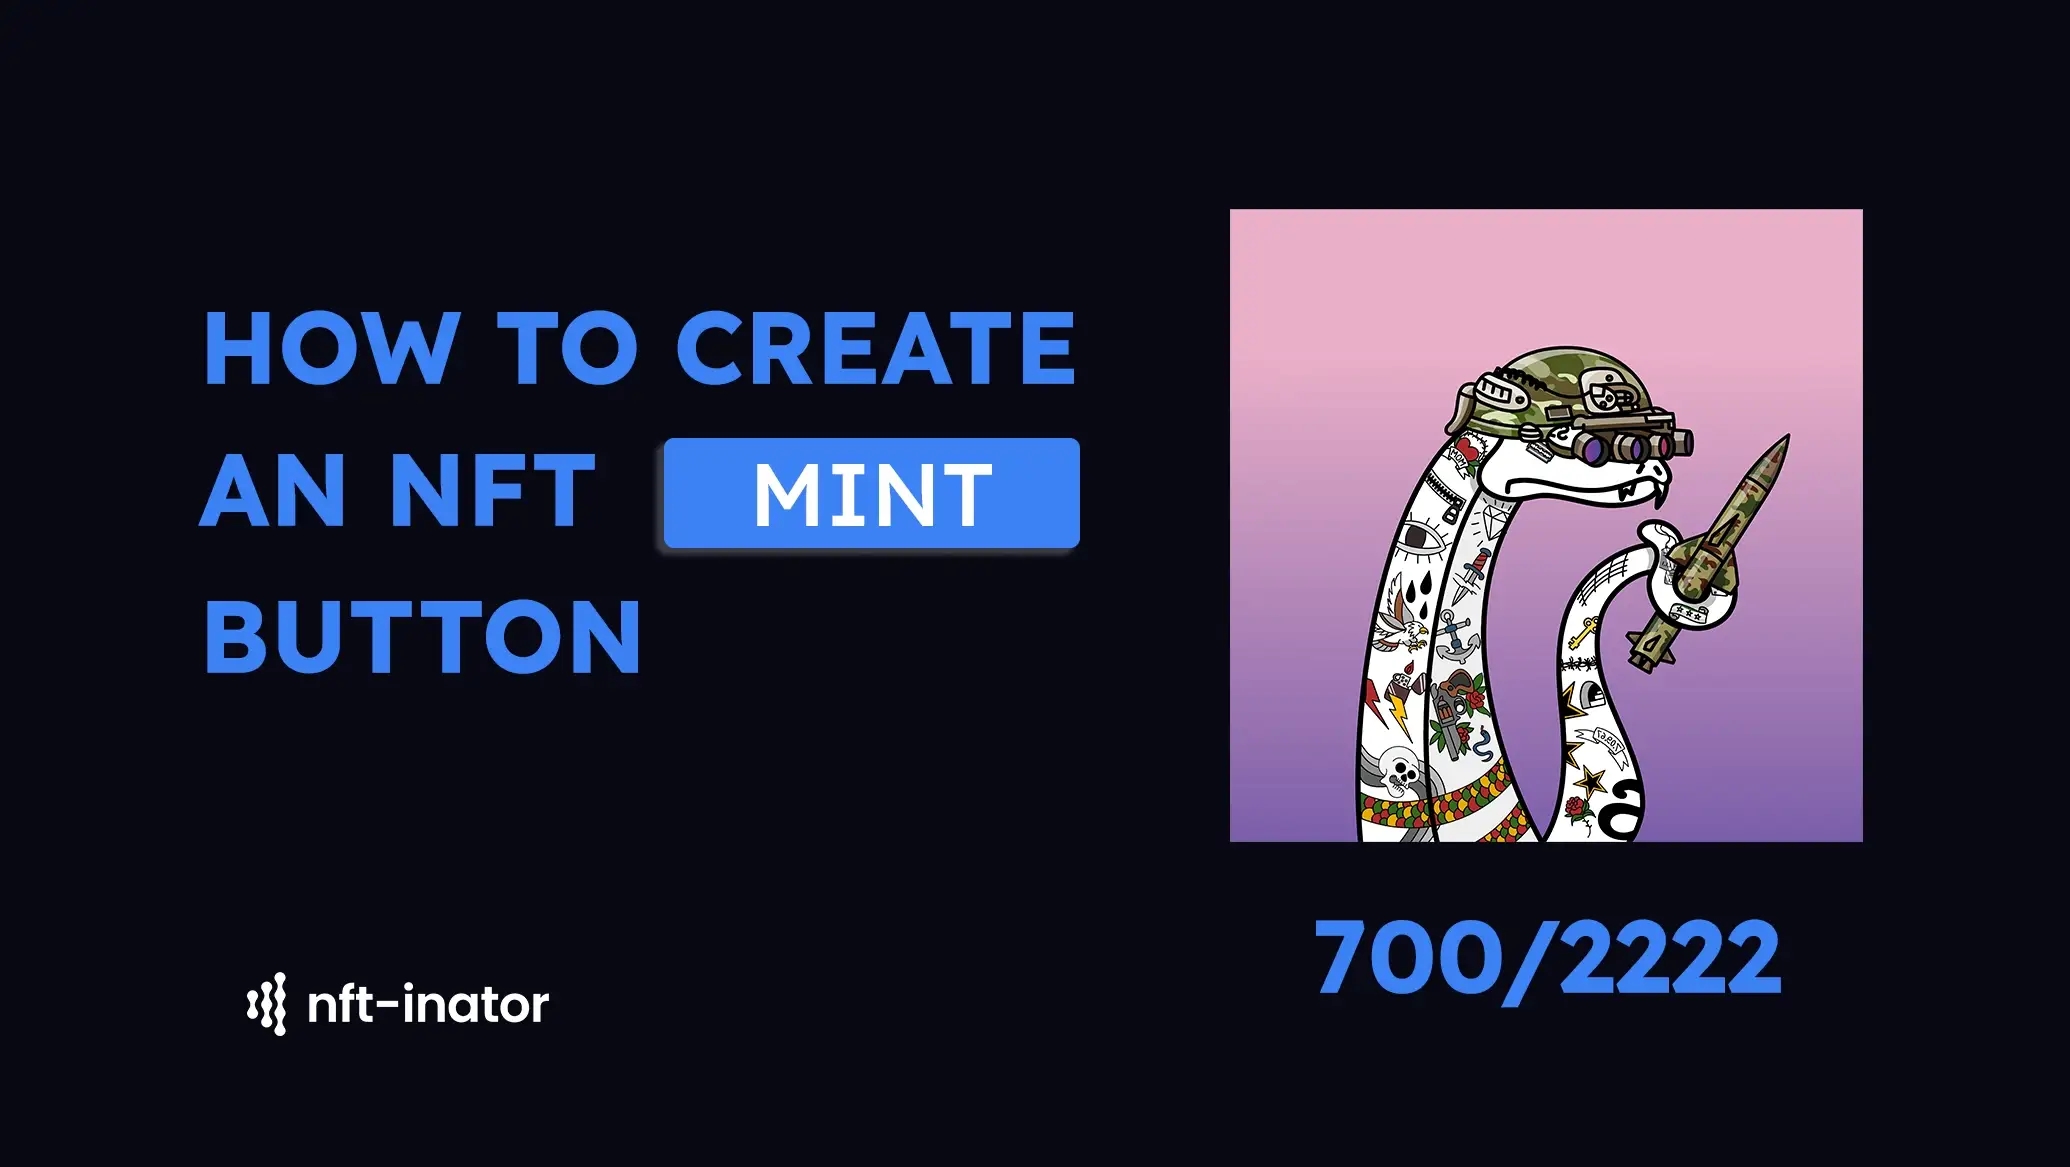 Adding a Mint Button to Your Website: A Simple, No code Solution with NFT-Inator